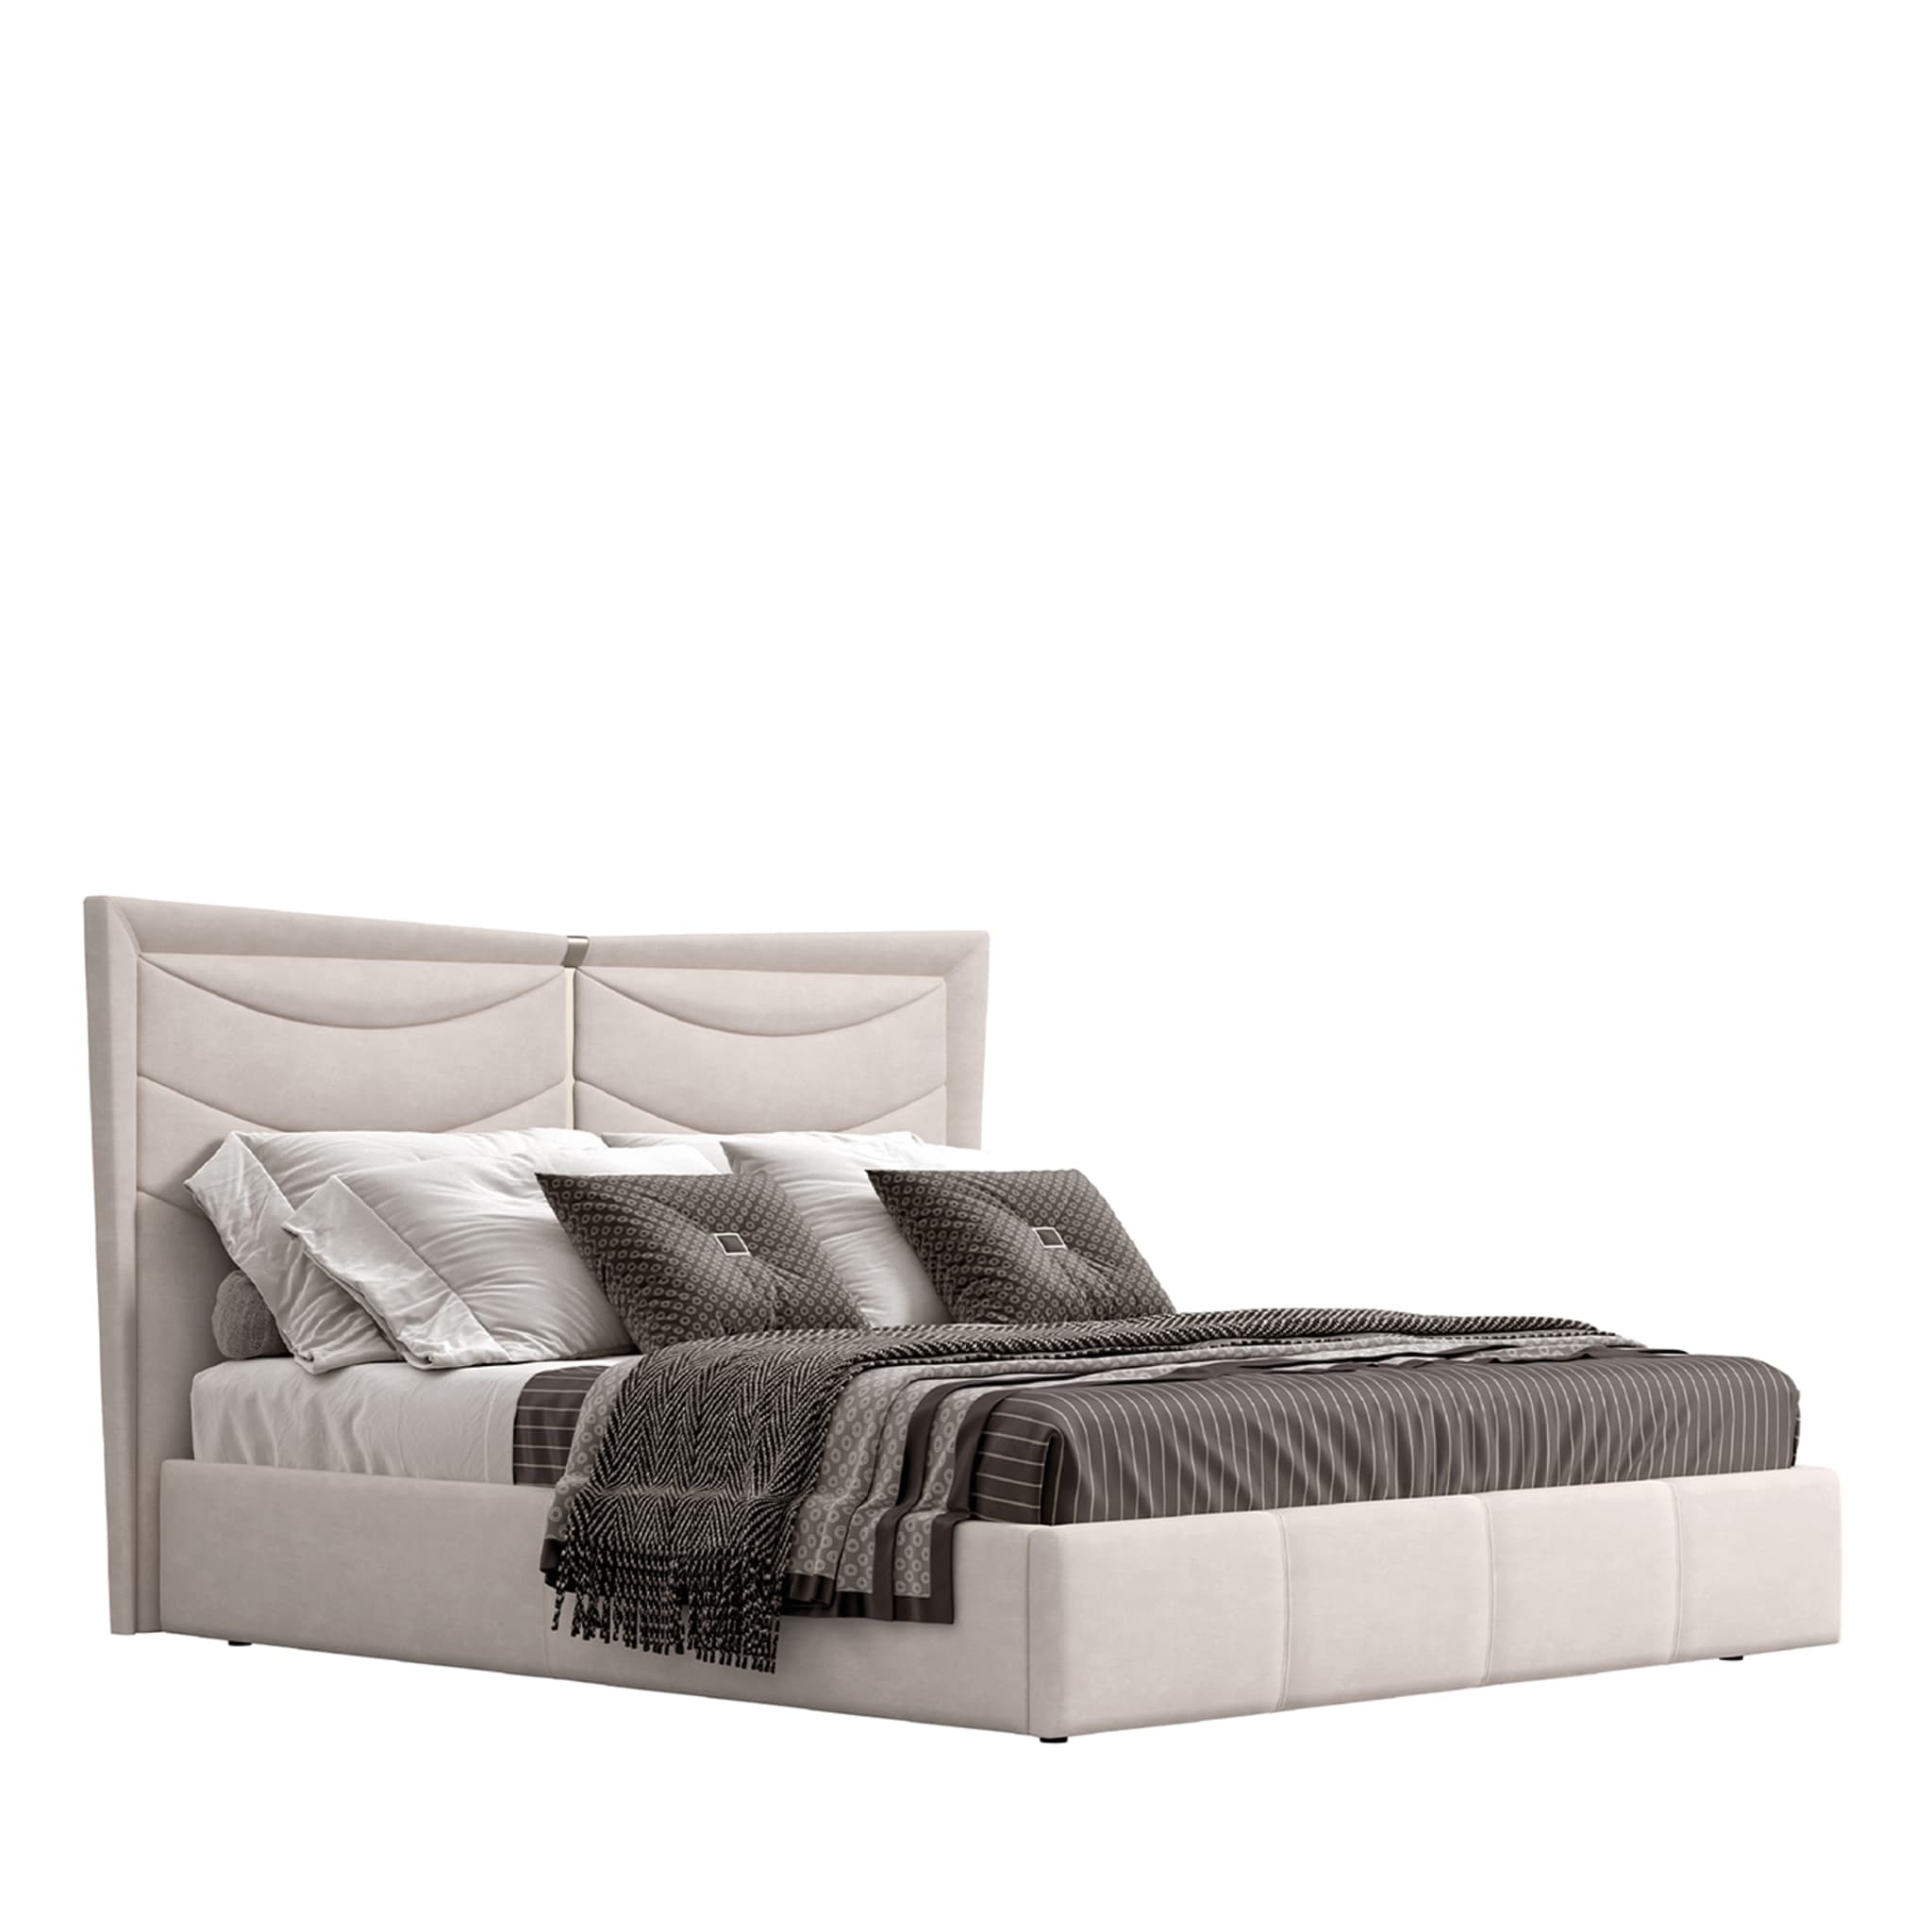 Deseo Beige Double Bed - Main view